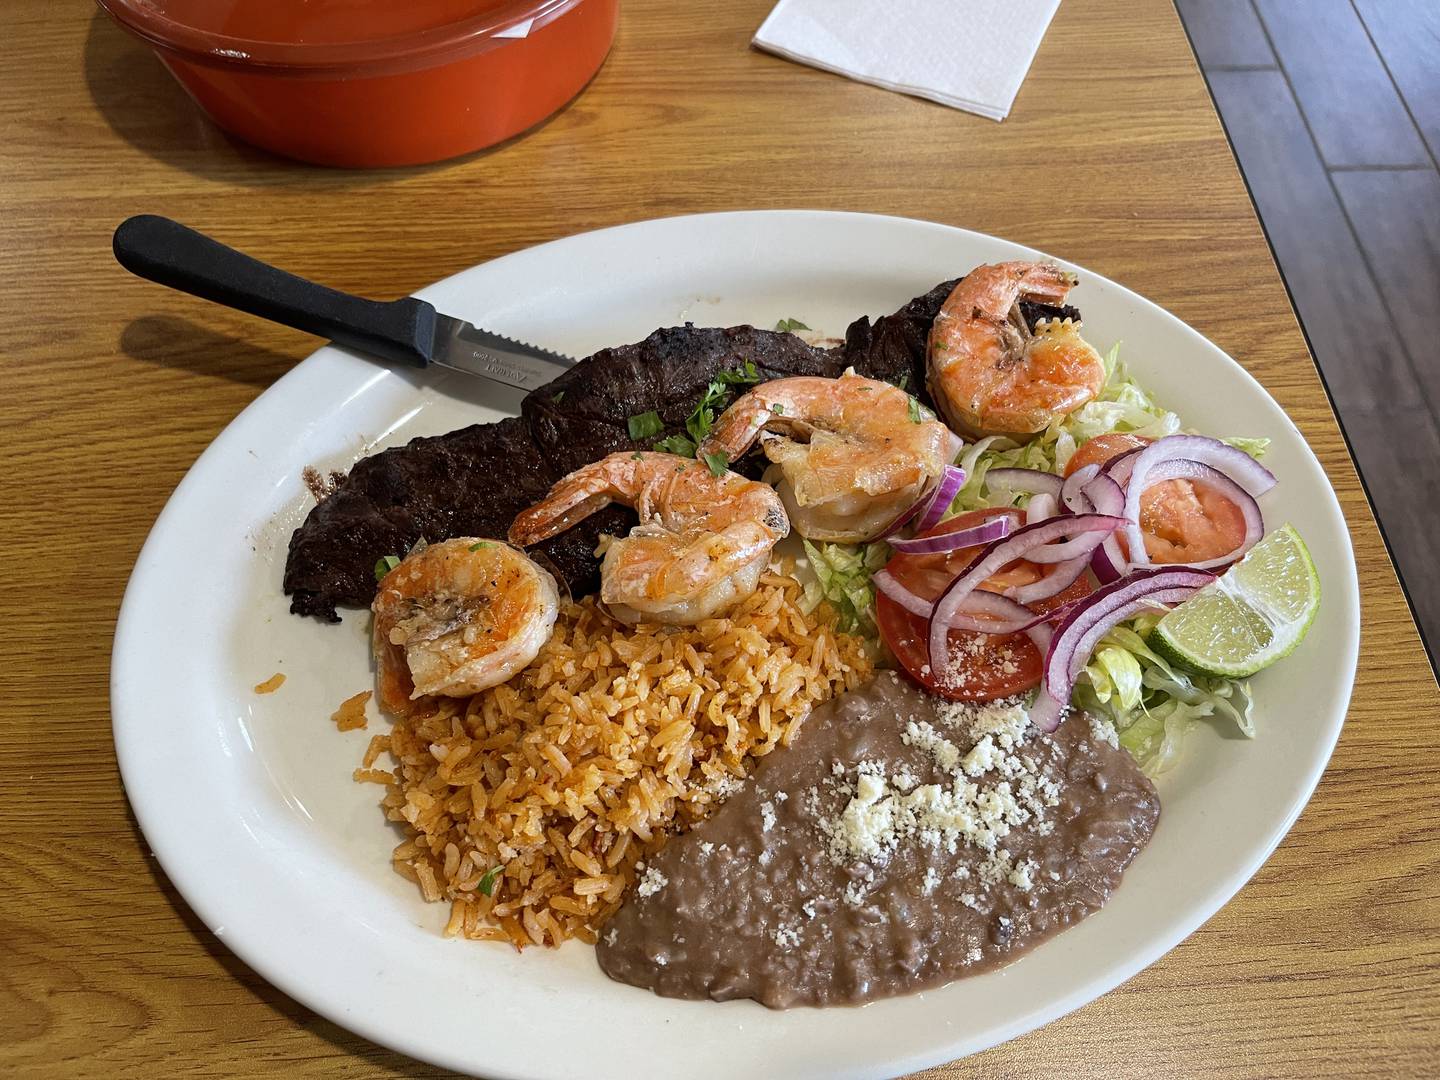 The mar y tierra, a skirt steak and shrimp with sides, makes for a great meal by itself, or for a taco with the tortillas it comes with.